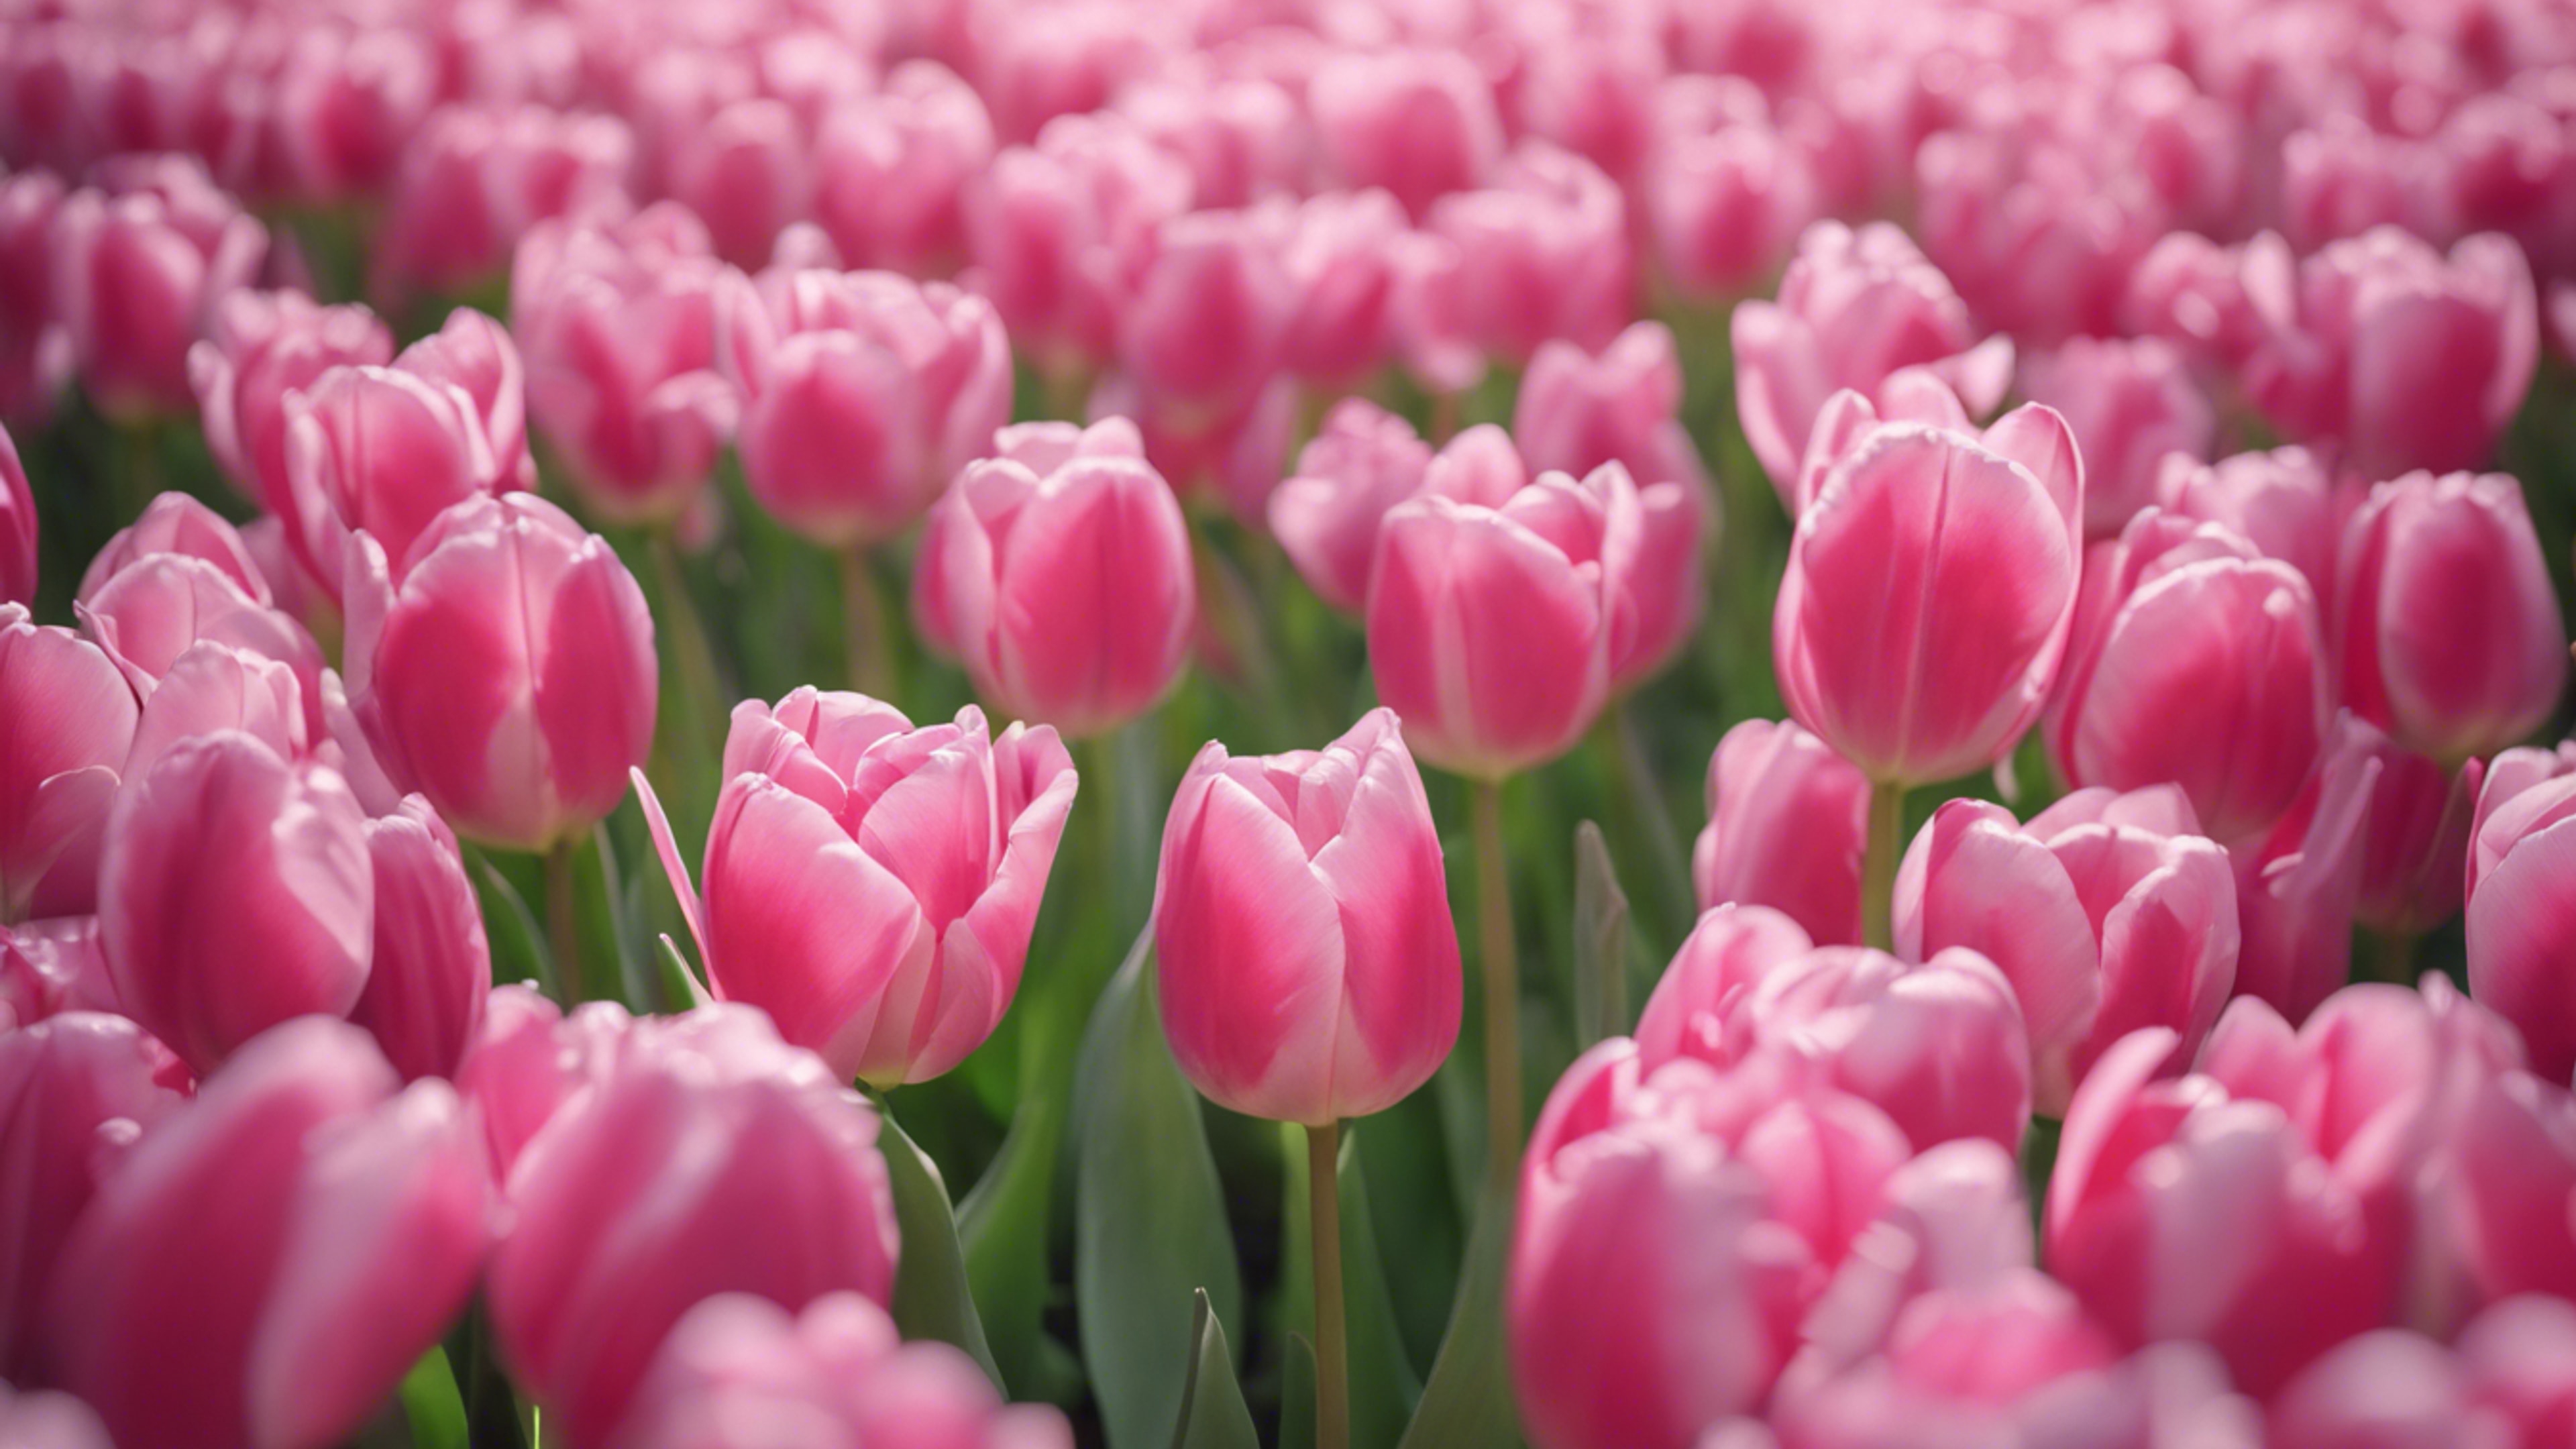 A group of pink tulips forming a perfect heart shape. ផ្ទាំង​រូបភាព[03142173a34943bc92d4]